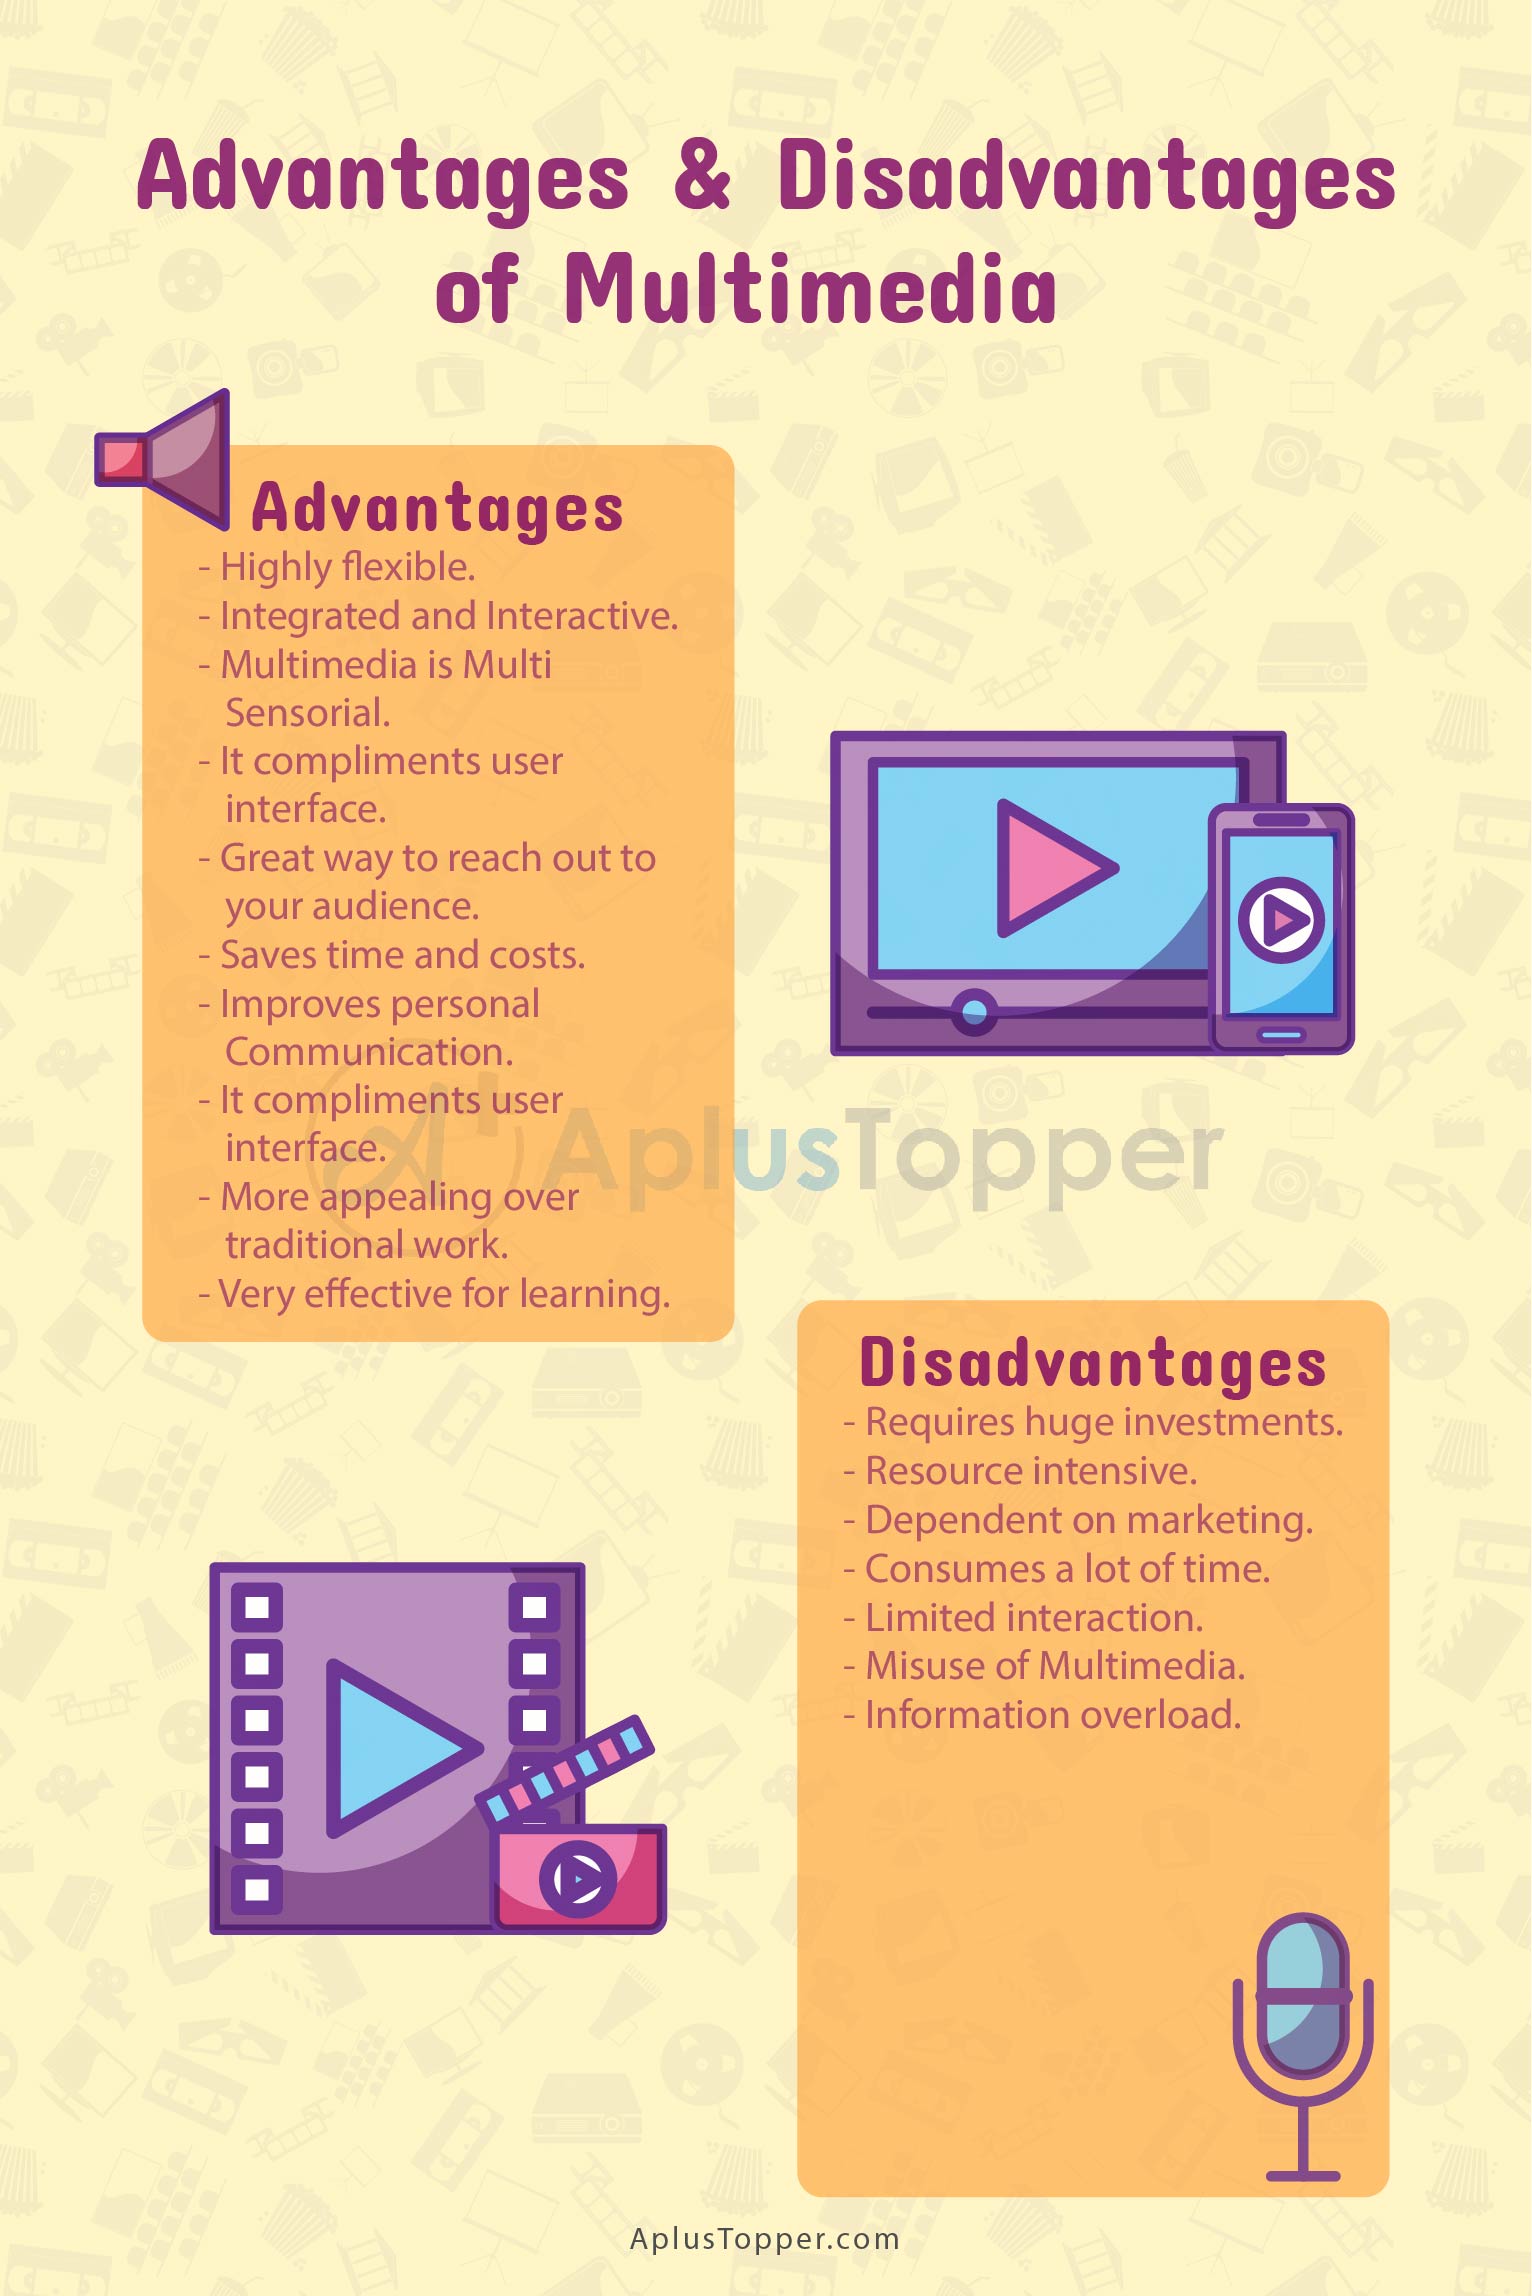 Advantages And Disadvantages Of Multimedia | 9 Benefits of Multimedia, Pros  and Cons - A Plus Topper